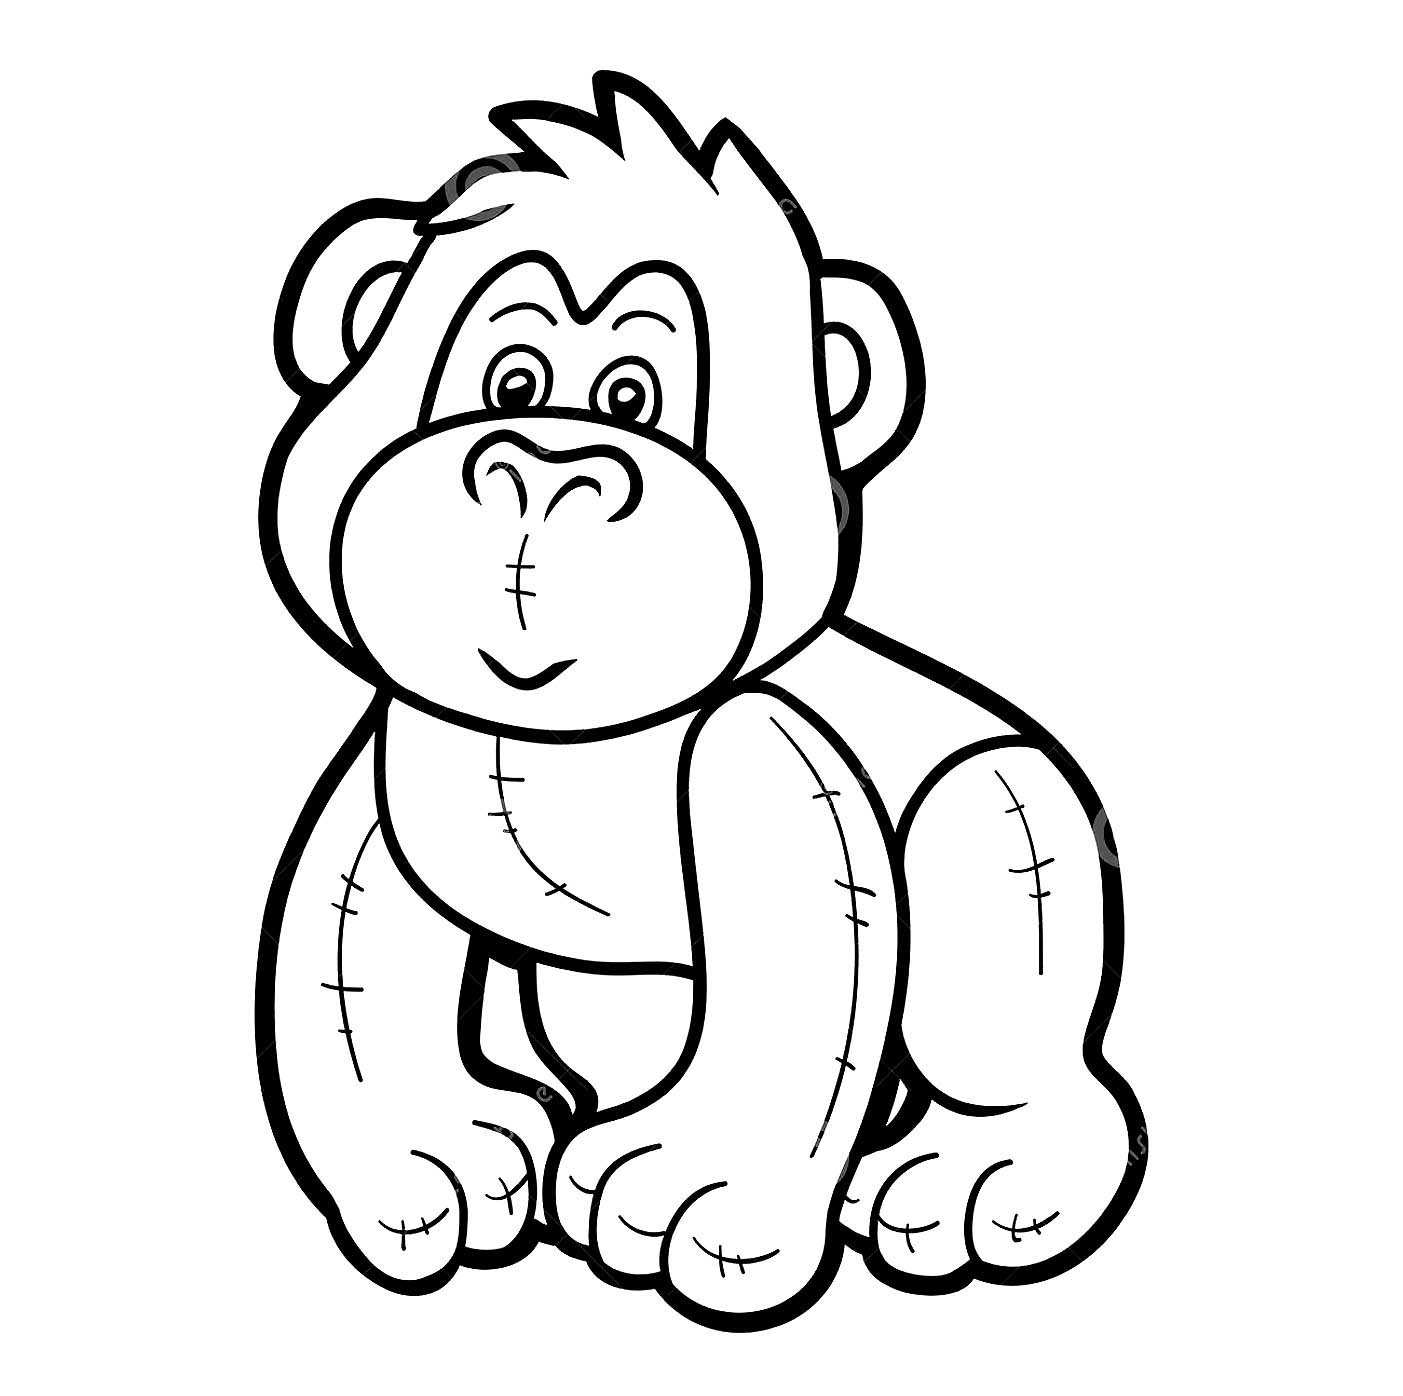 Gorilla Coloring Pages to download and print for free